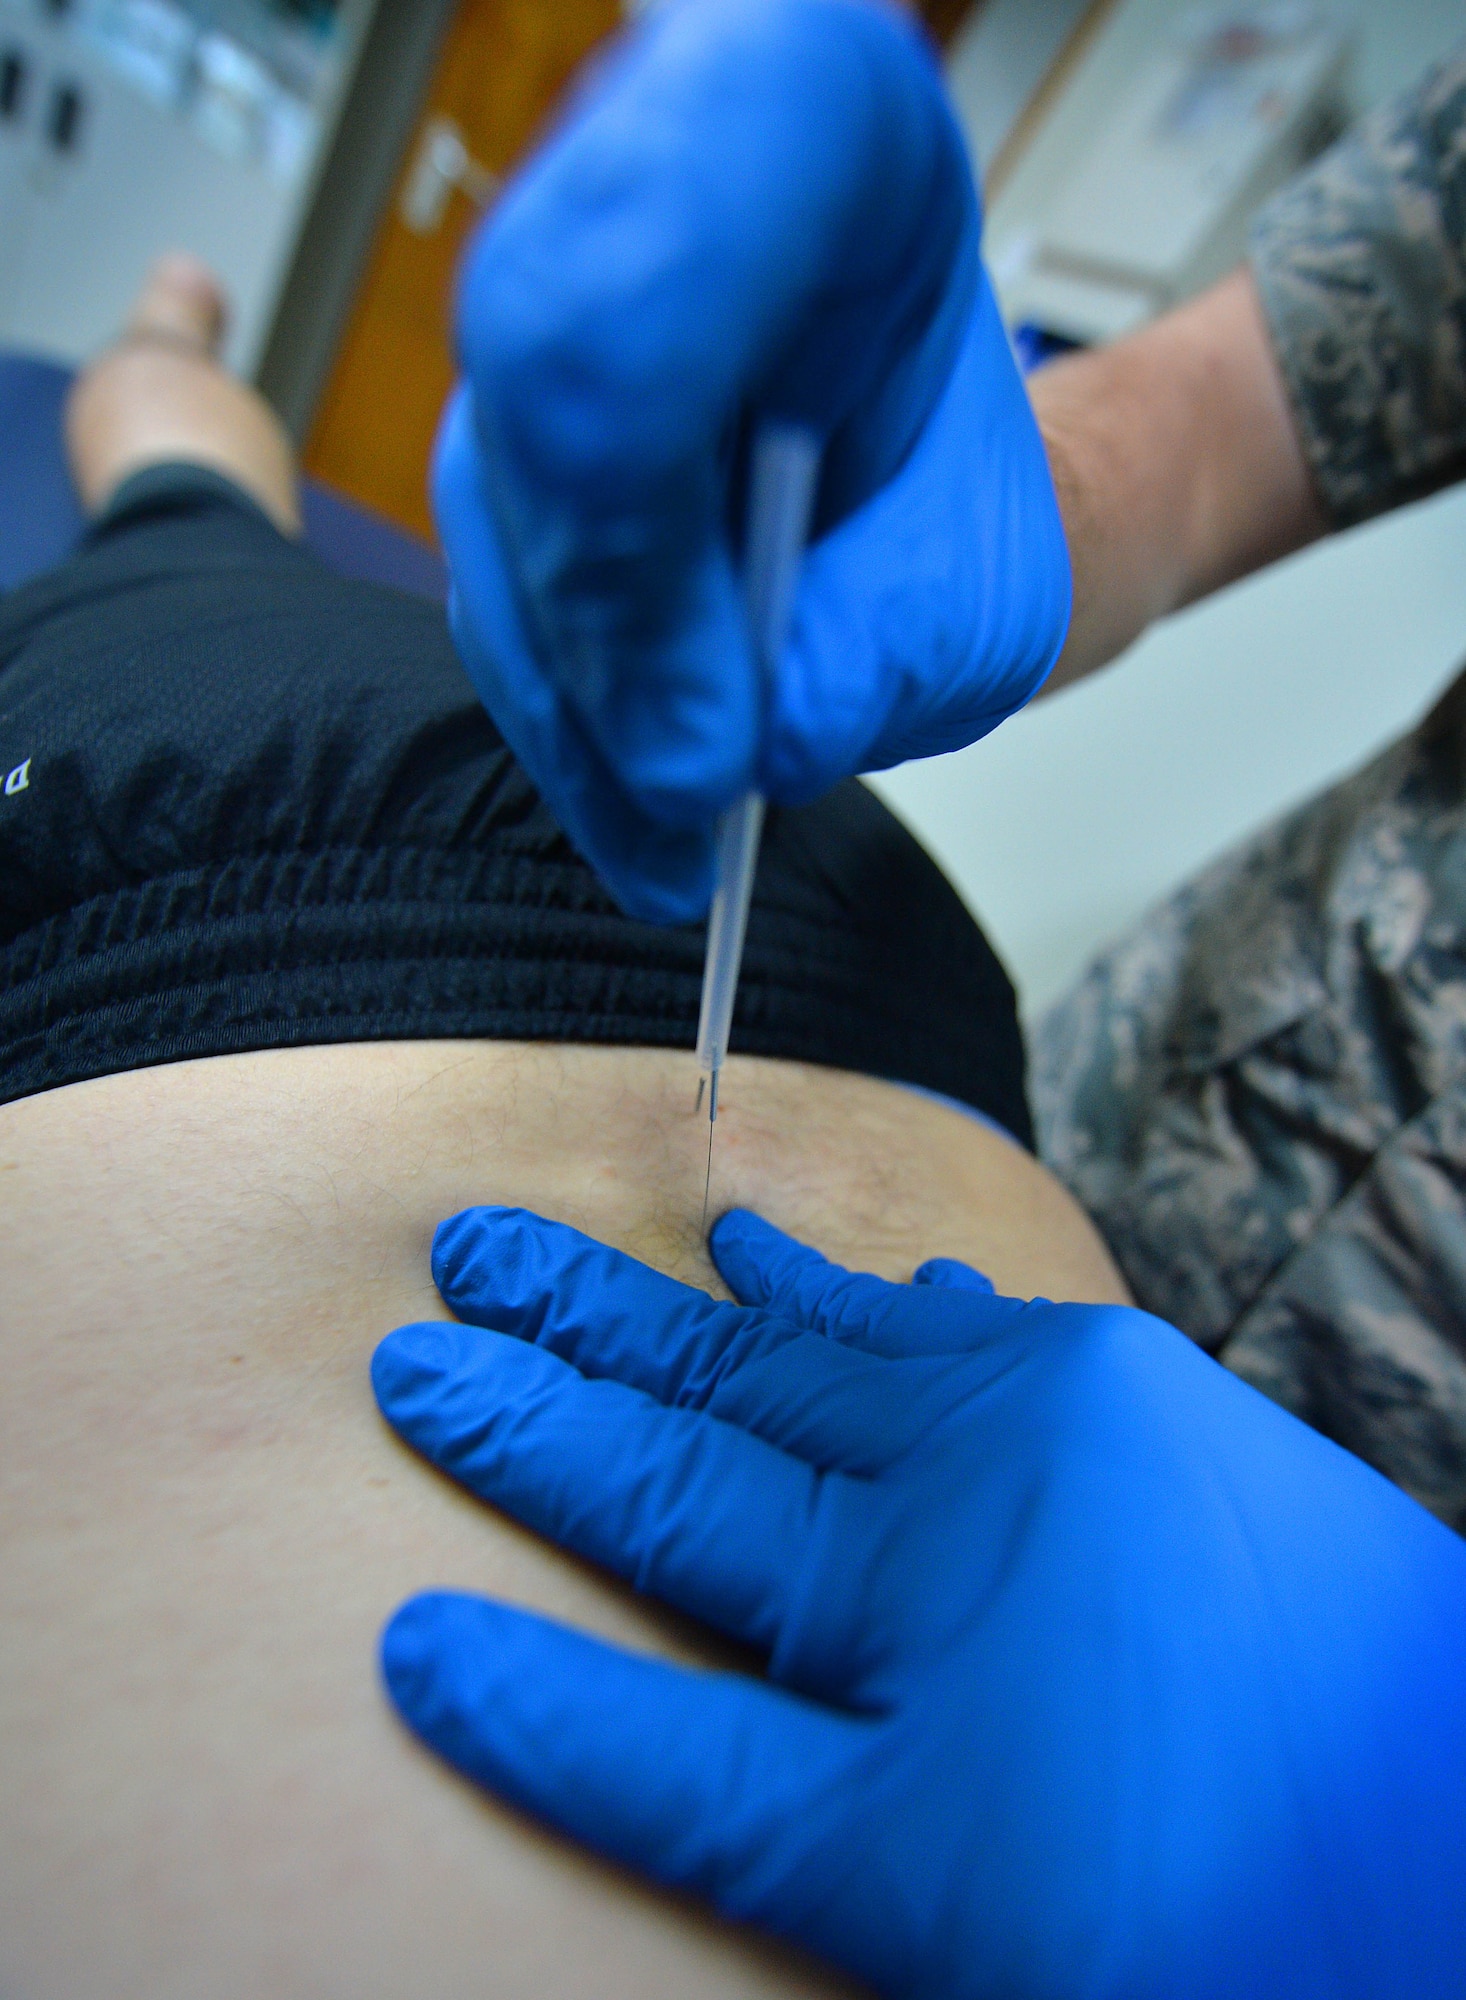 Capt. Joshua, 380th Expeditionary Medical Squadron physical therapist, uses trigger-point dry needling to help relieve a patient’s back injury at an undisclosed location in Southwest Asia Sept. 1, 2015. The physical therapy team is responsible for evaluating patients and utilizing different therapeutic procedures to help restore patient functions. (U.S. Air Force photo/Tech. Sgt. Jeff Andrejcik)  
